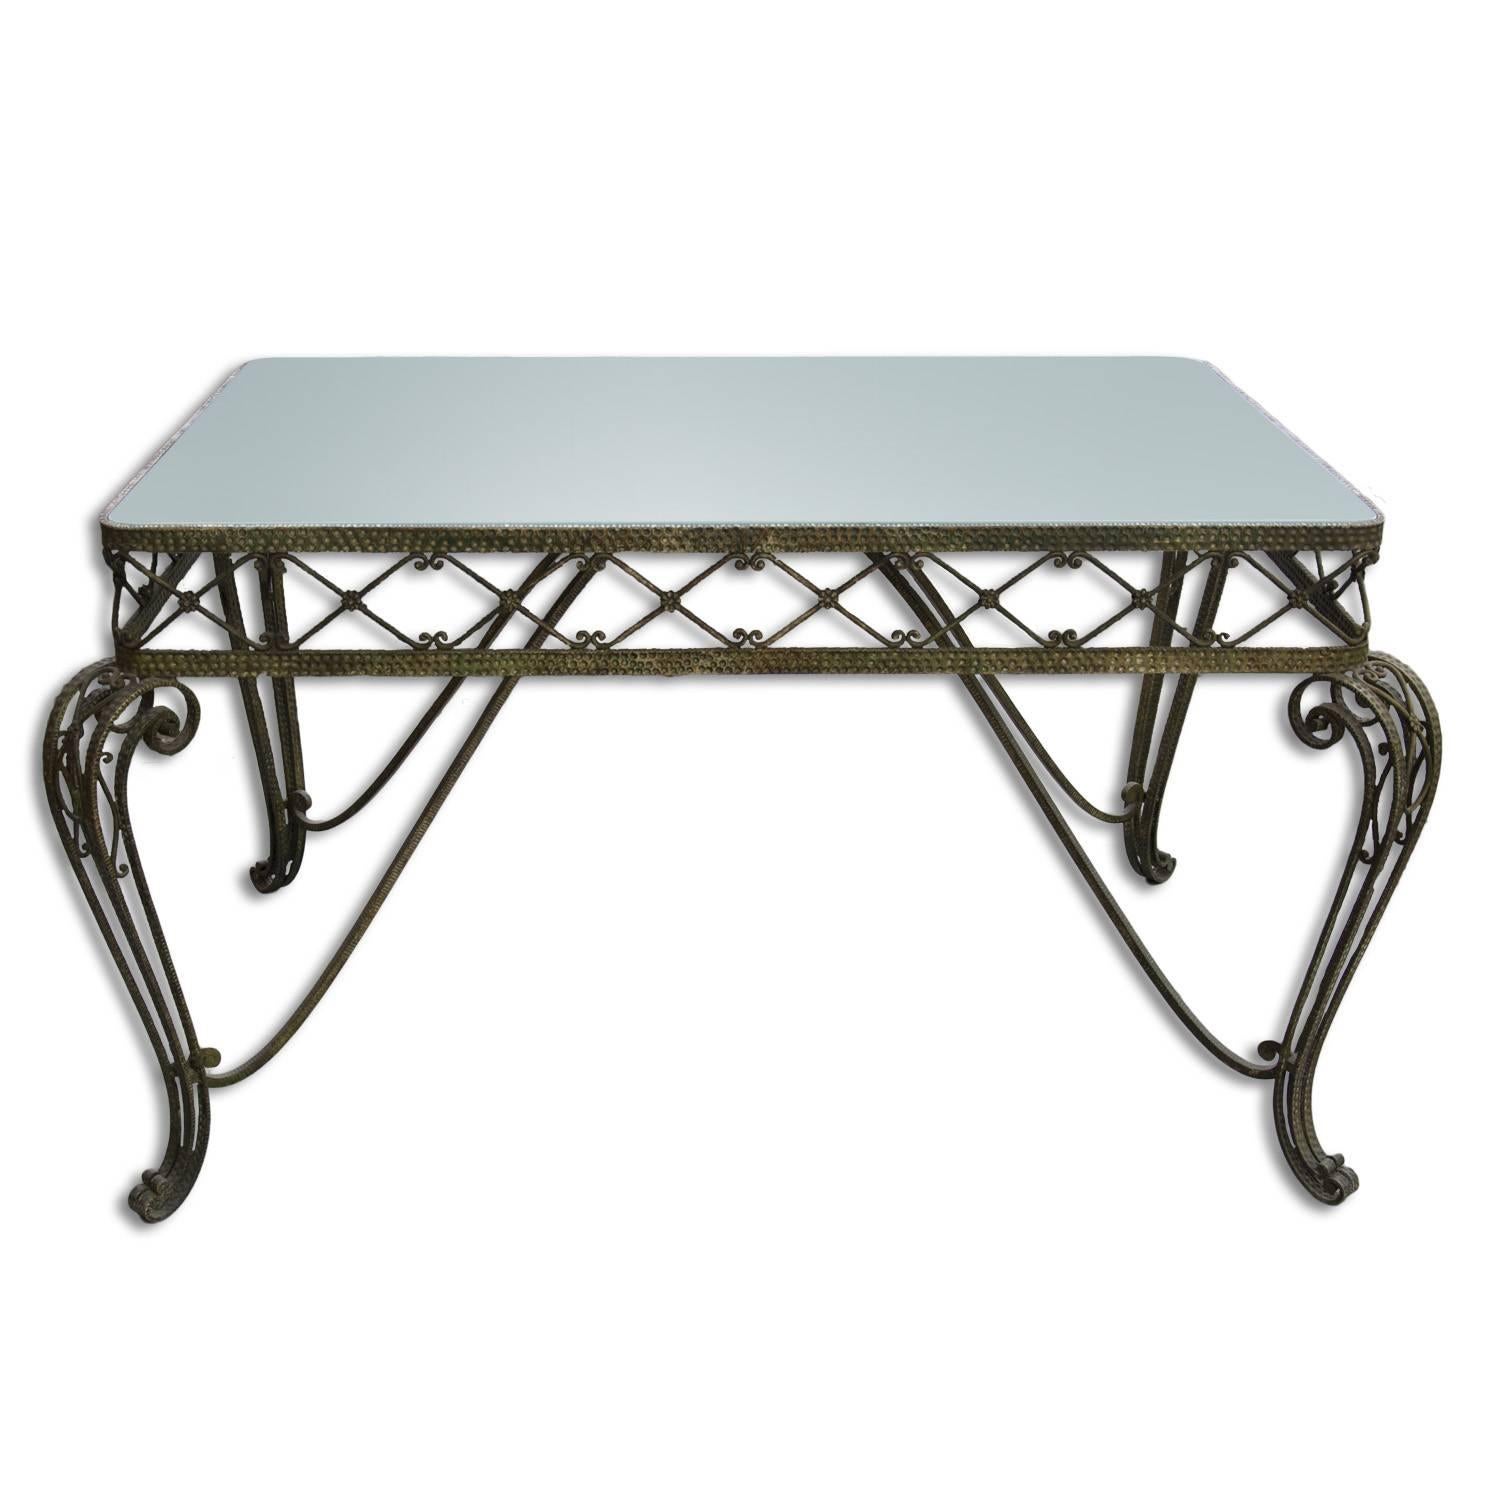 This large massive Regency style table was made in Italy in the 1950s. Attribute to Pier Luigi Colli. The table features a light green glass plate and a brass structure with decorative motifs typical of this style and period.